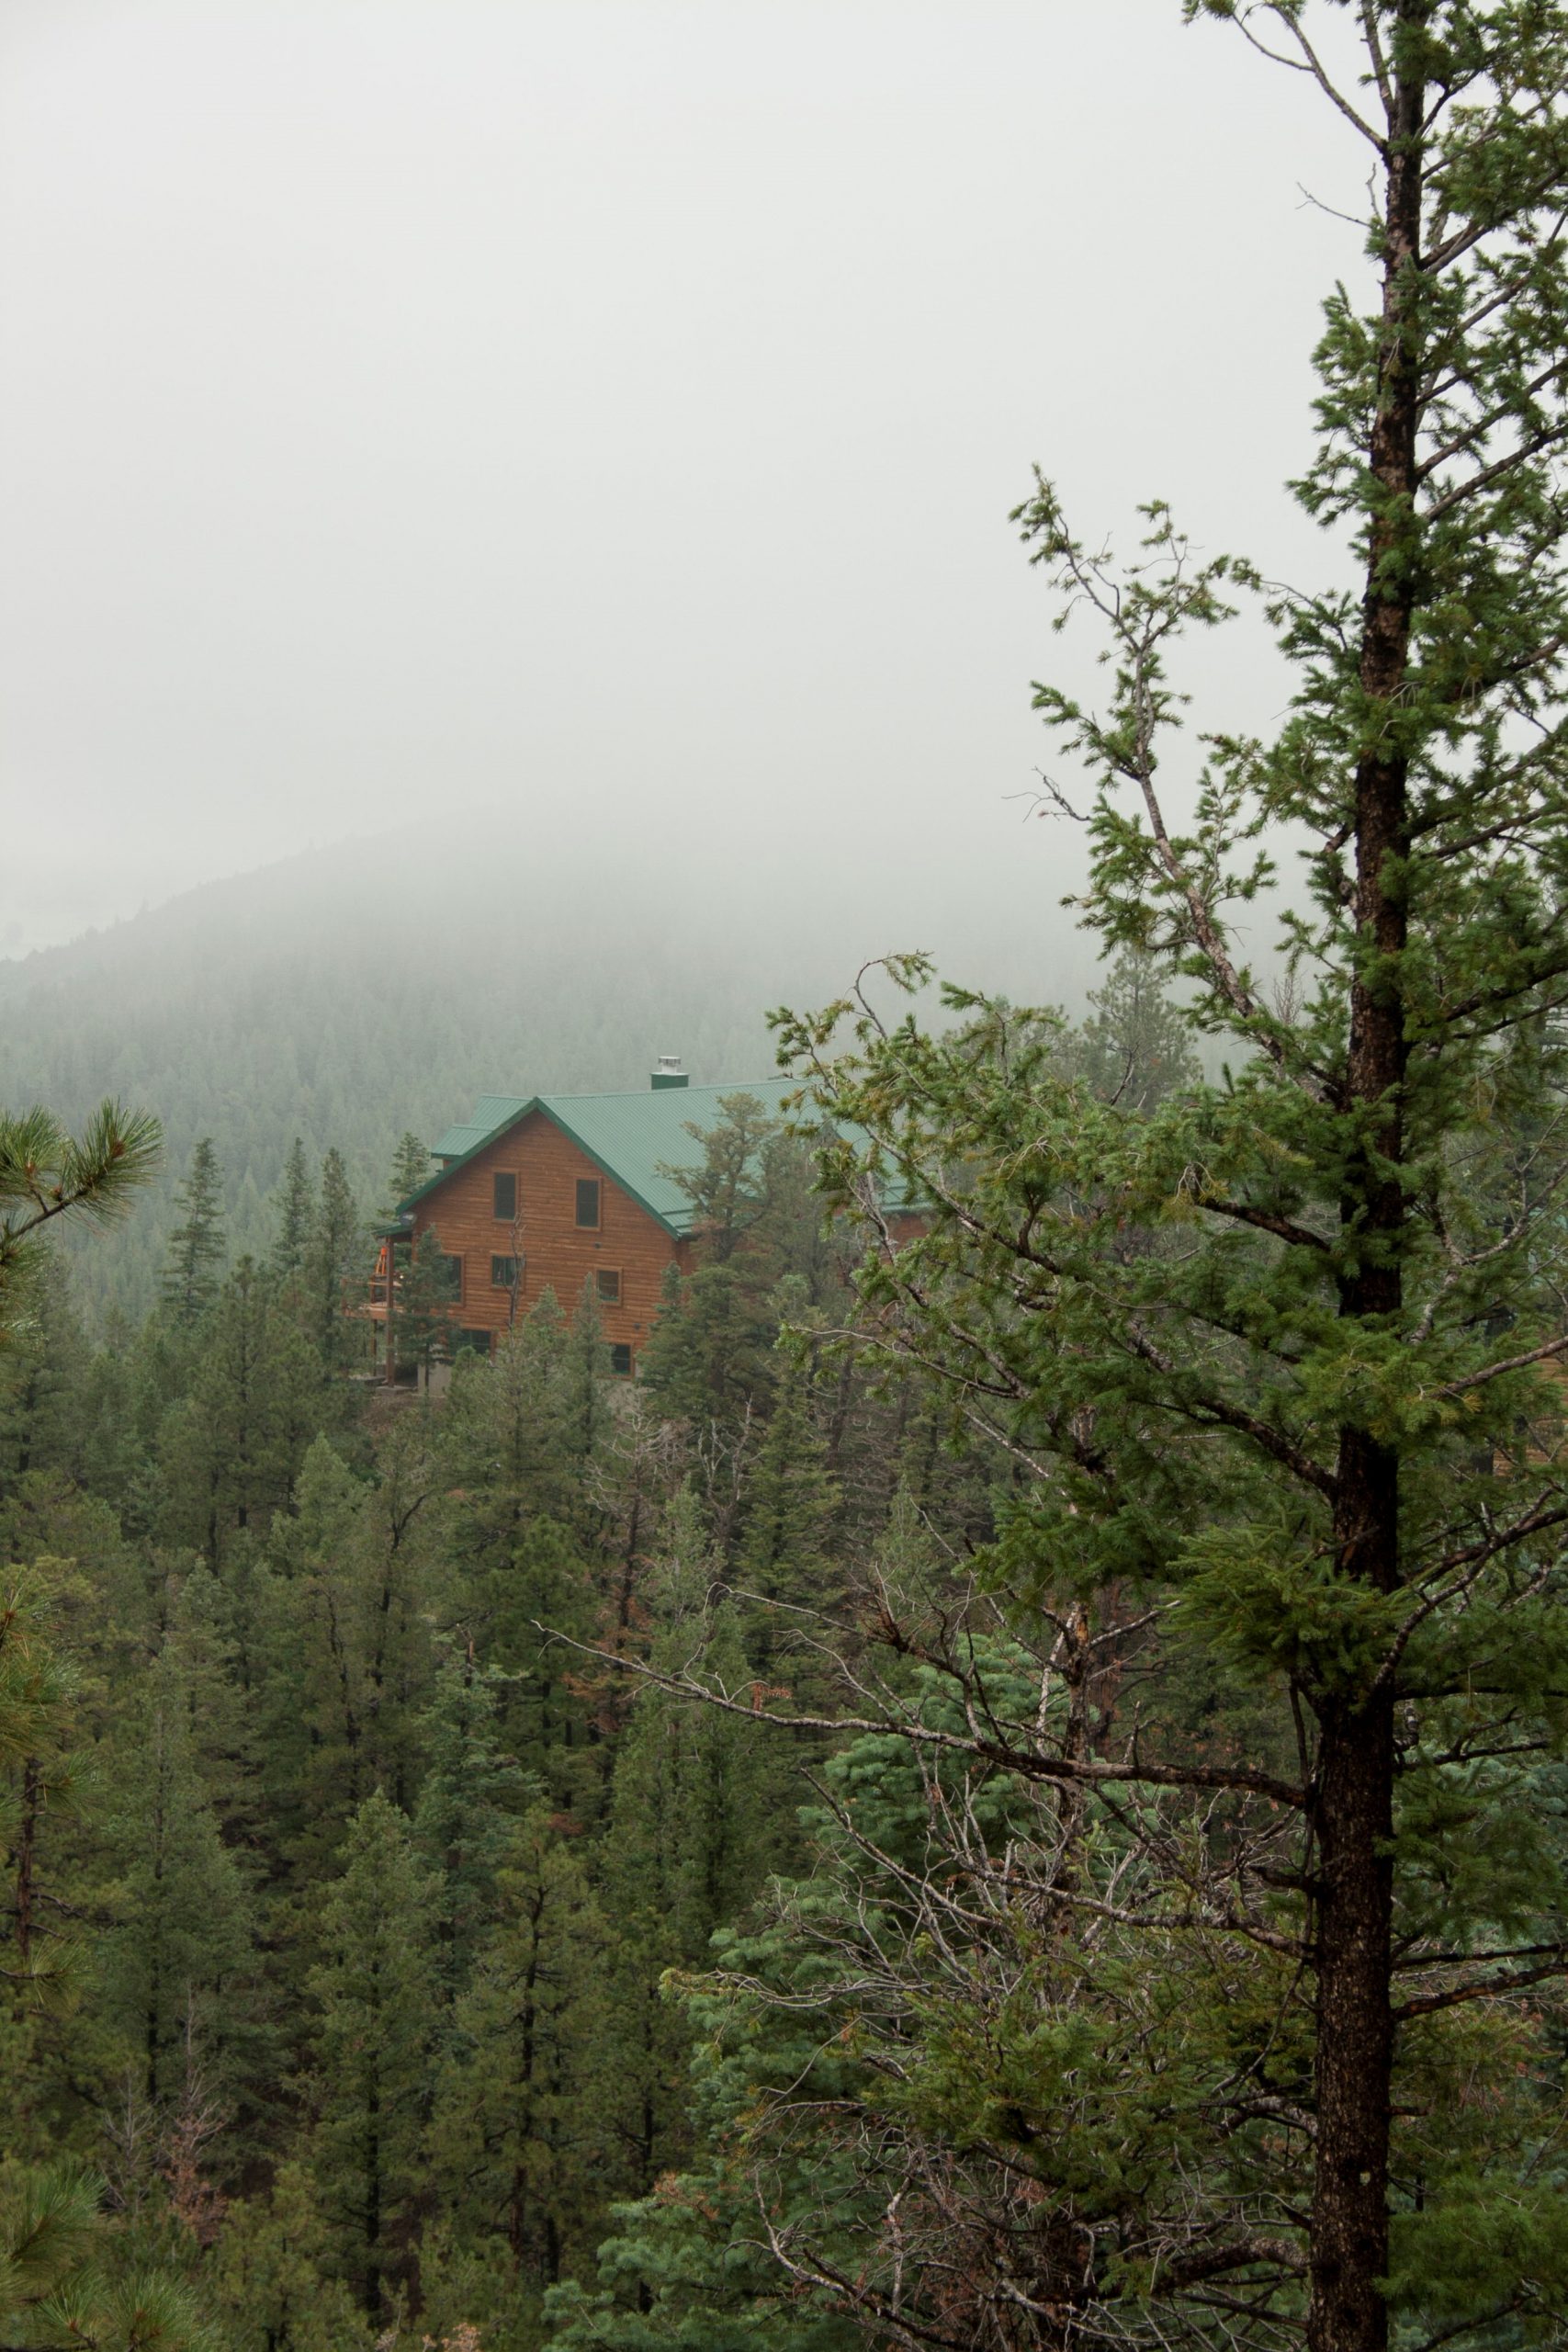 Cabin in the distance surrounded by trees in the mountains